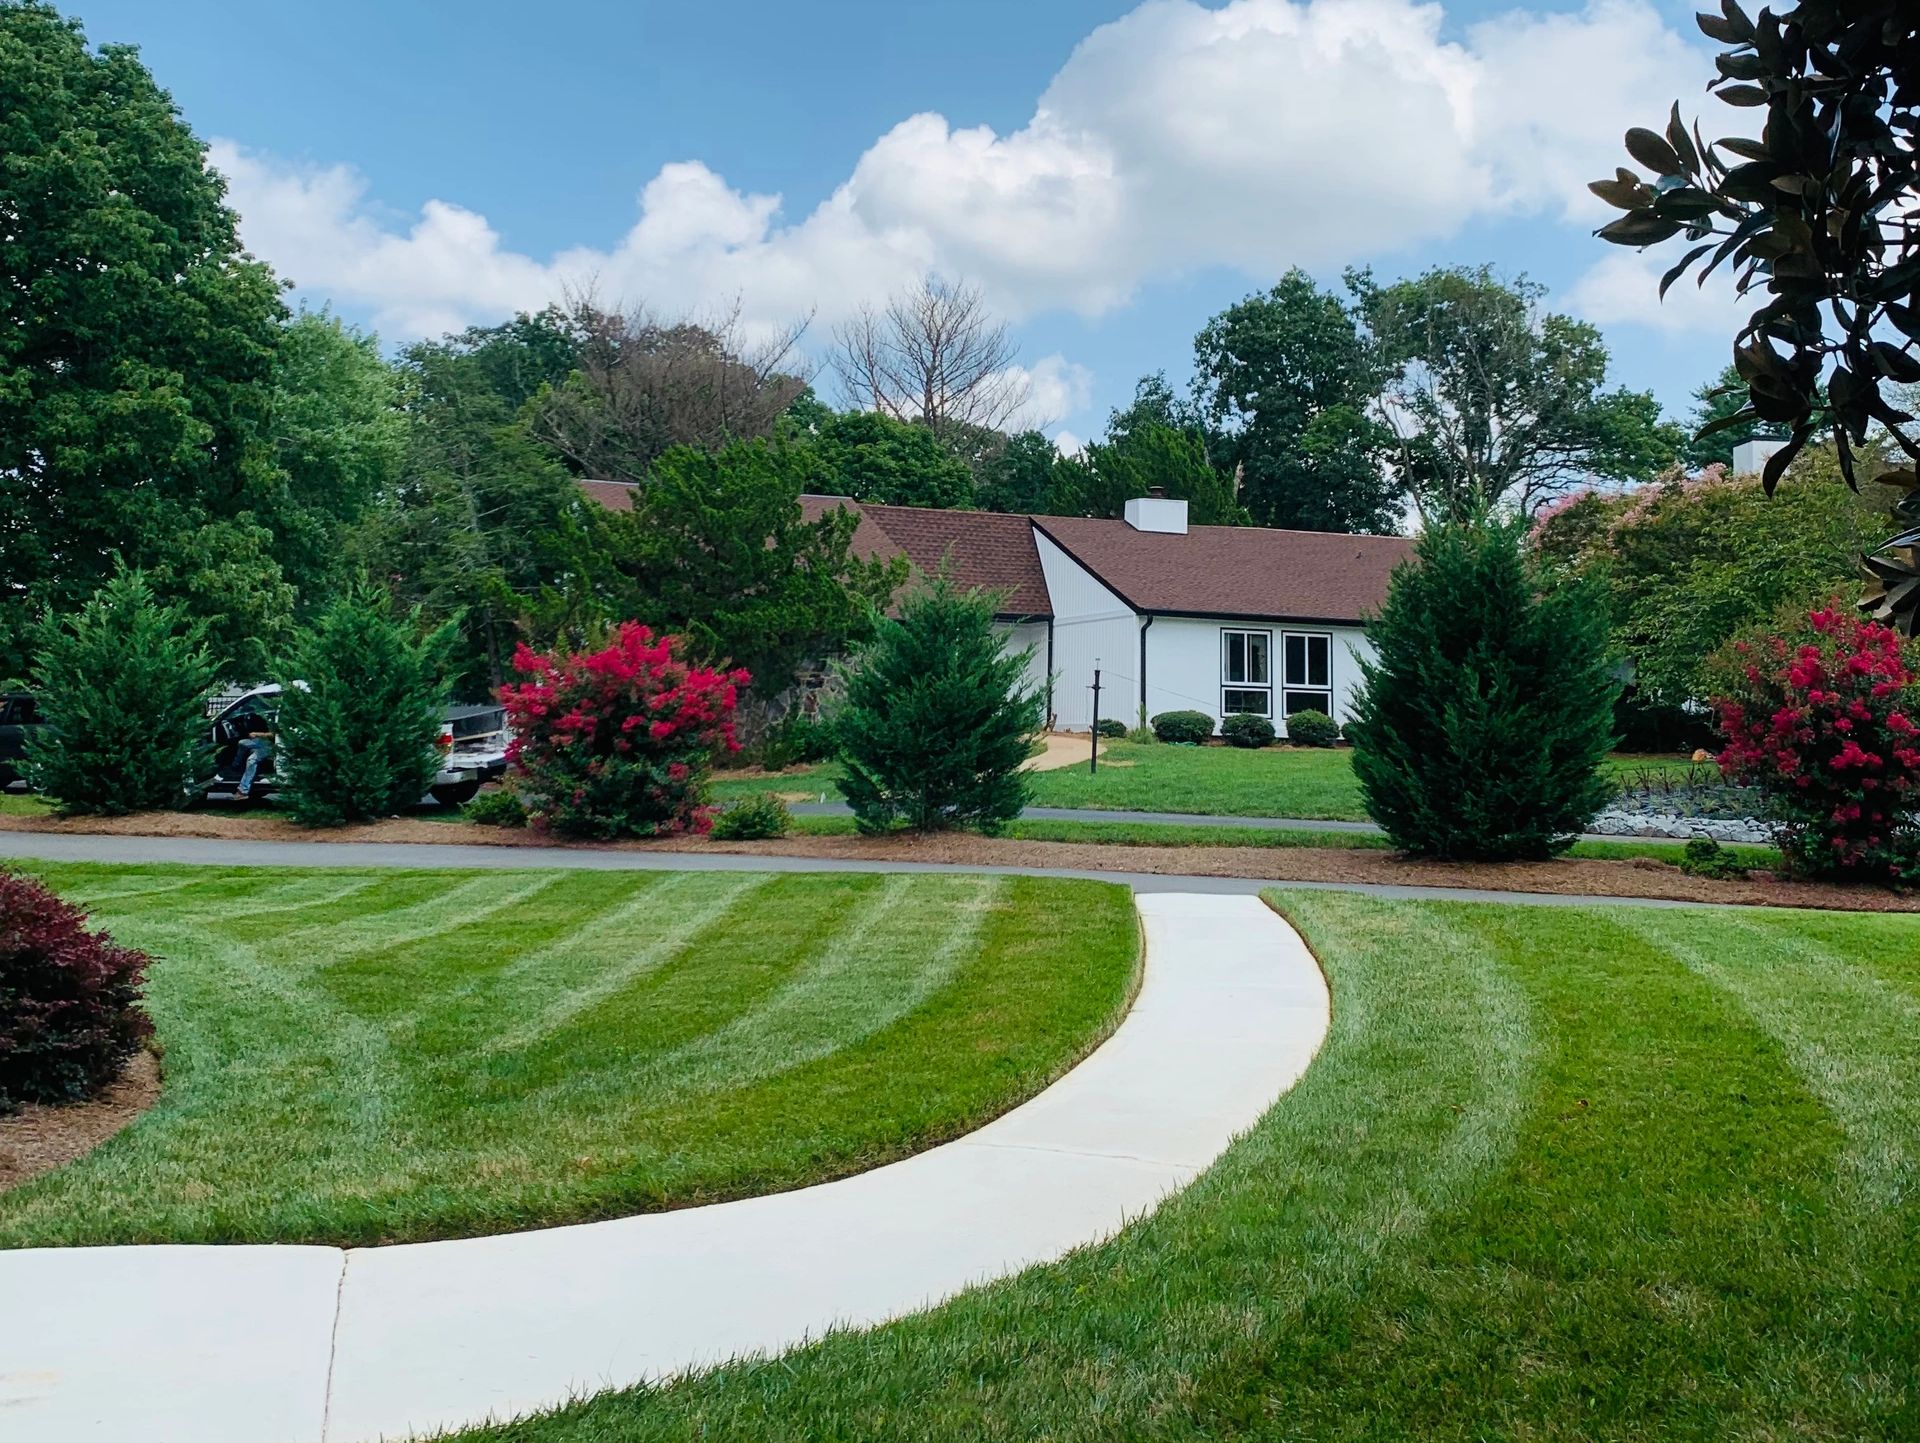 A well-manicured lawn with mowing patterns in front of a white house with black trim and a curved co